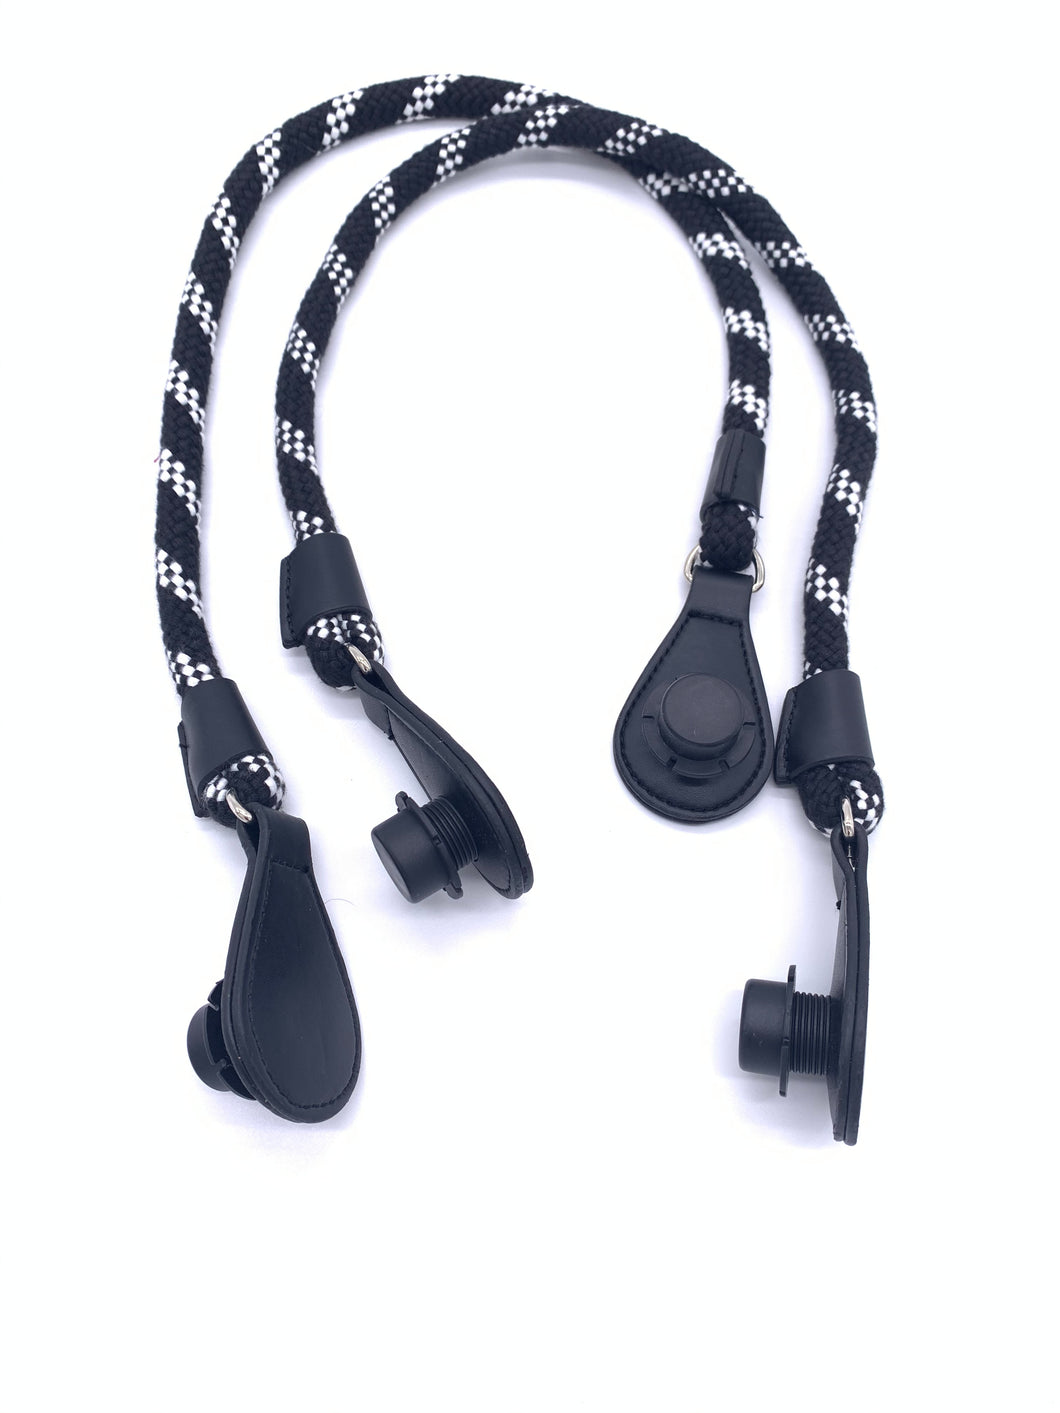 Be Me Bag Handles - Black With White Ropes